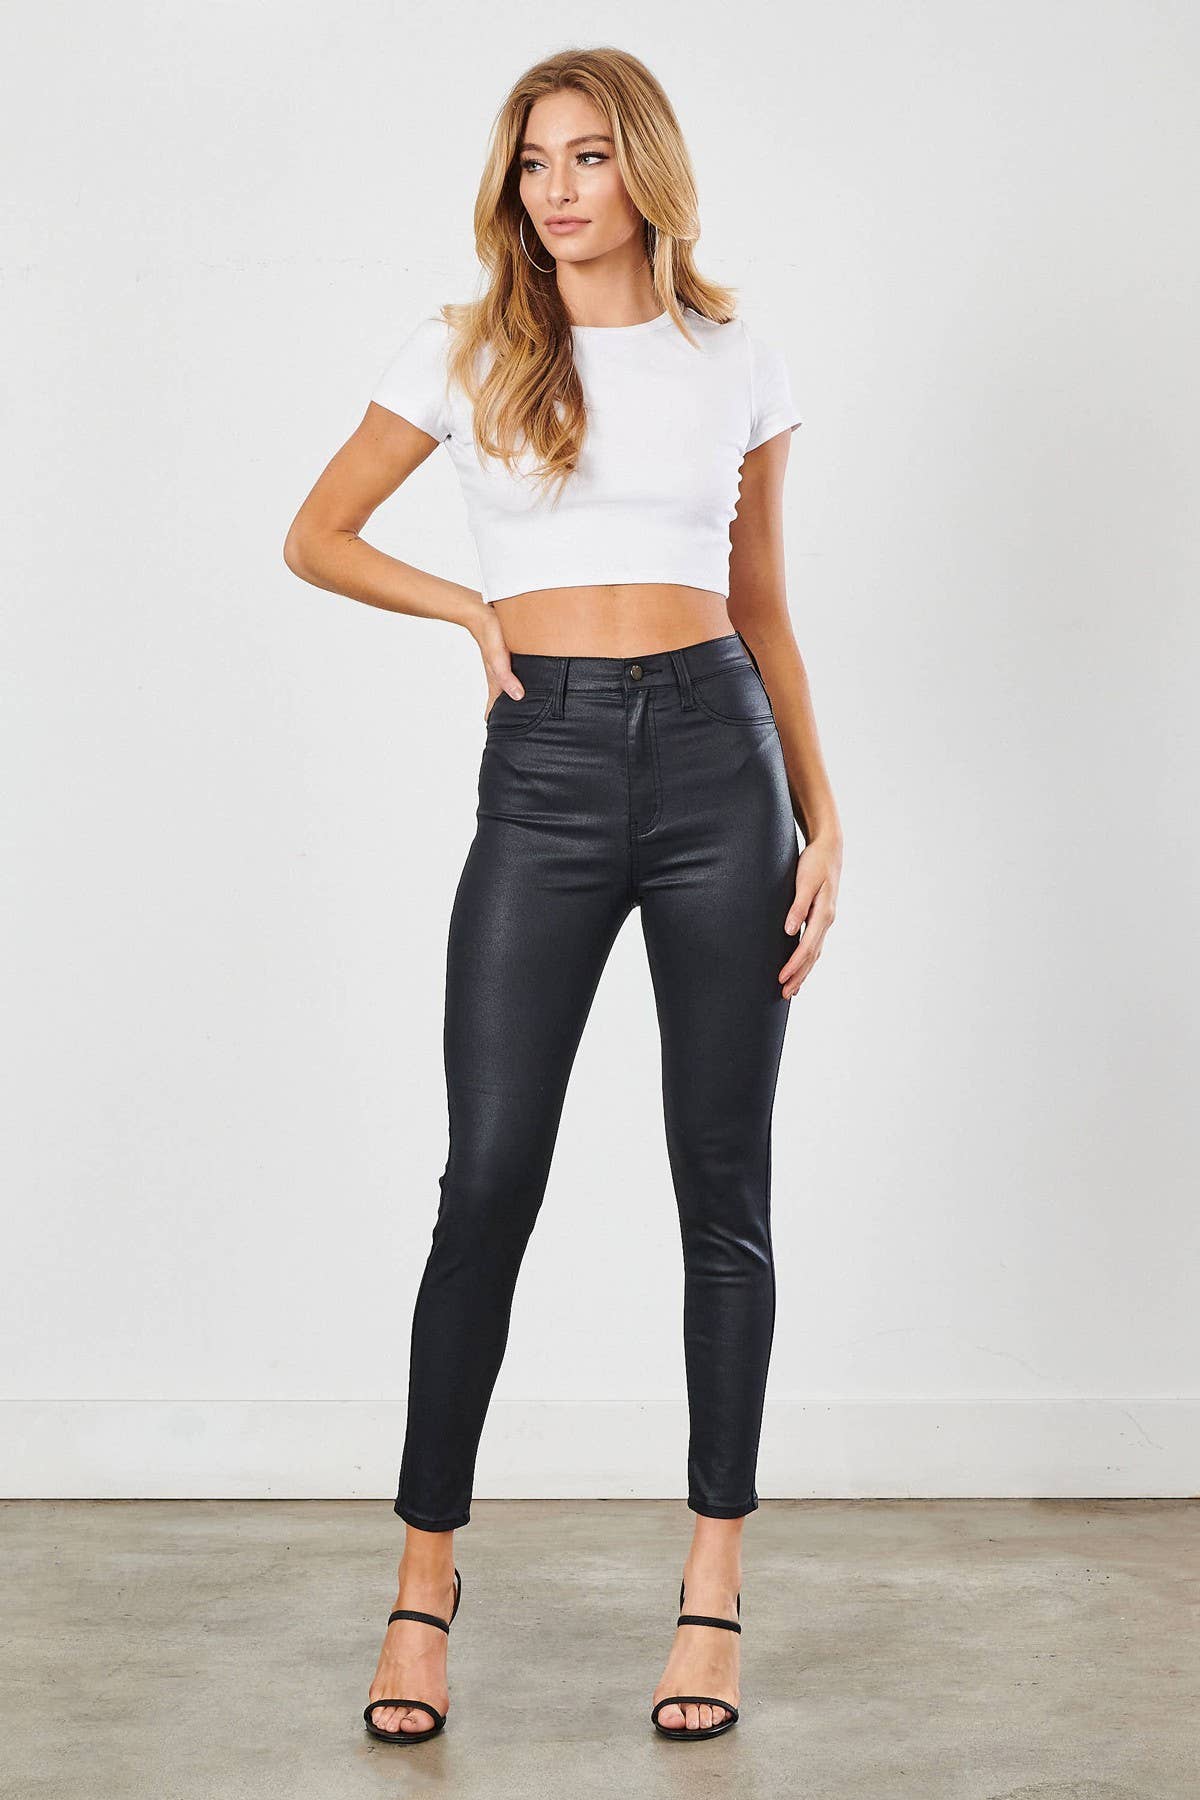 Coated Black Jeans